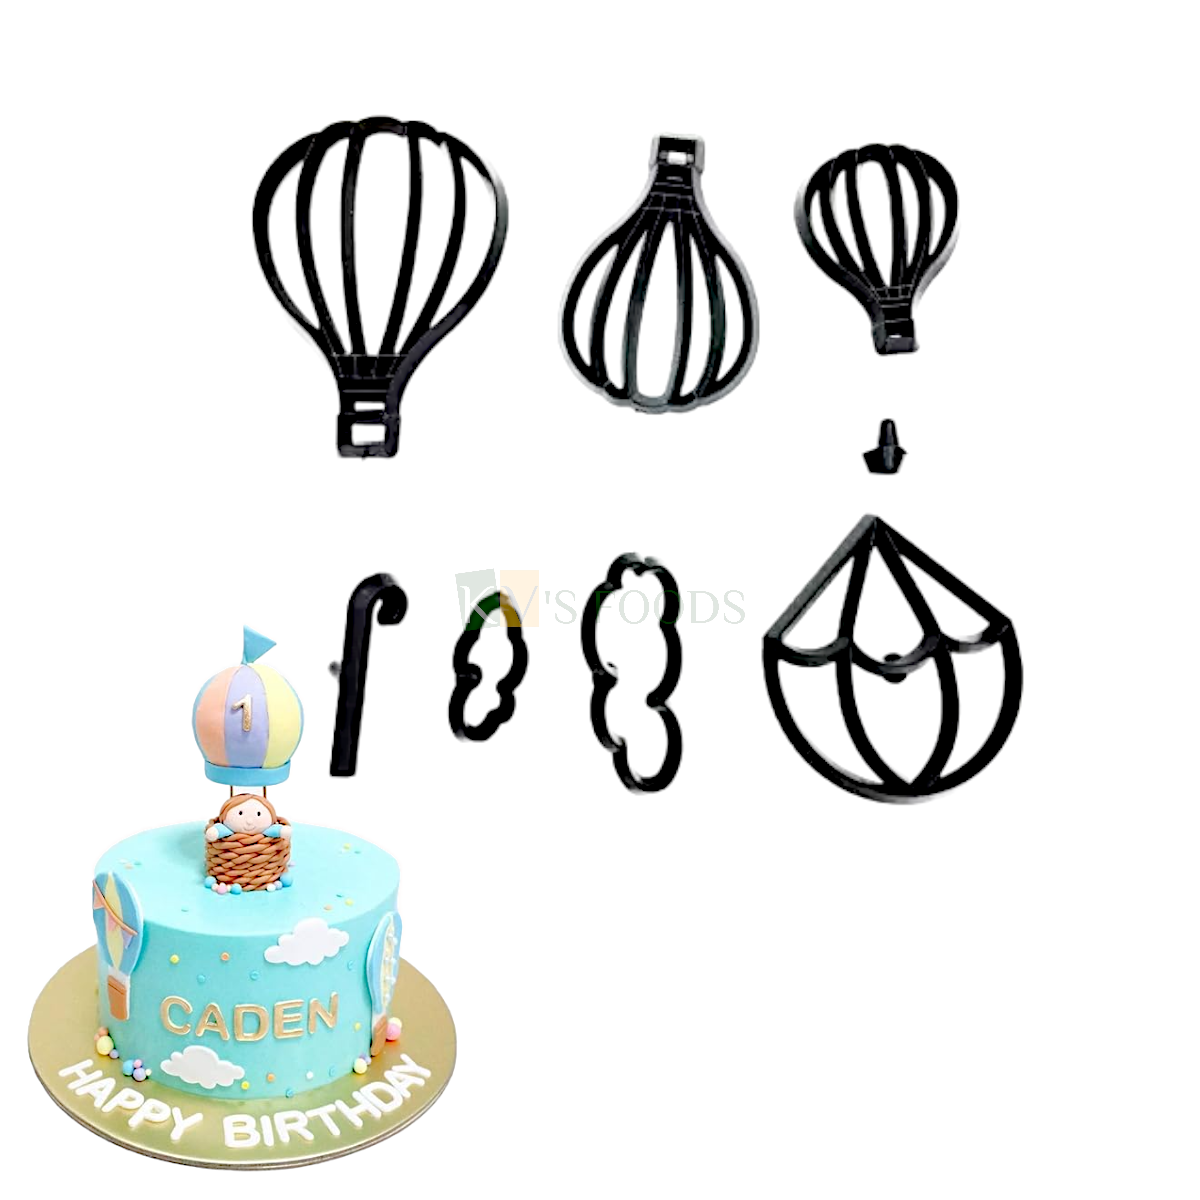 8 PCS Black Hot Air Balloon, Clouds, Parachute, Raindrop Sports Patchwork Fondant Silhouette Plunger Cutters Stamps, Embossing Molds Presses Impression, Pancake Cookies Boys Birthday Theme